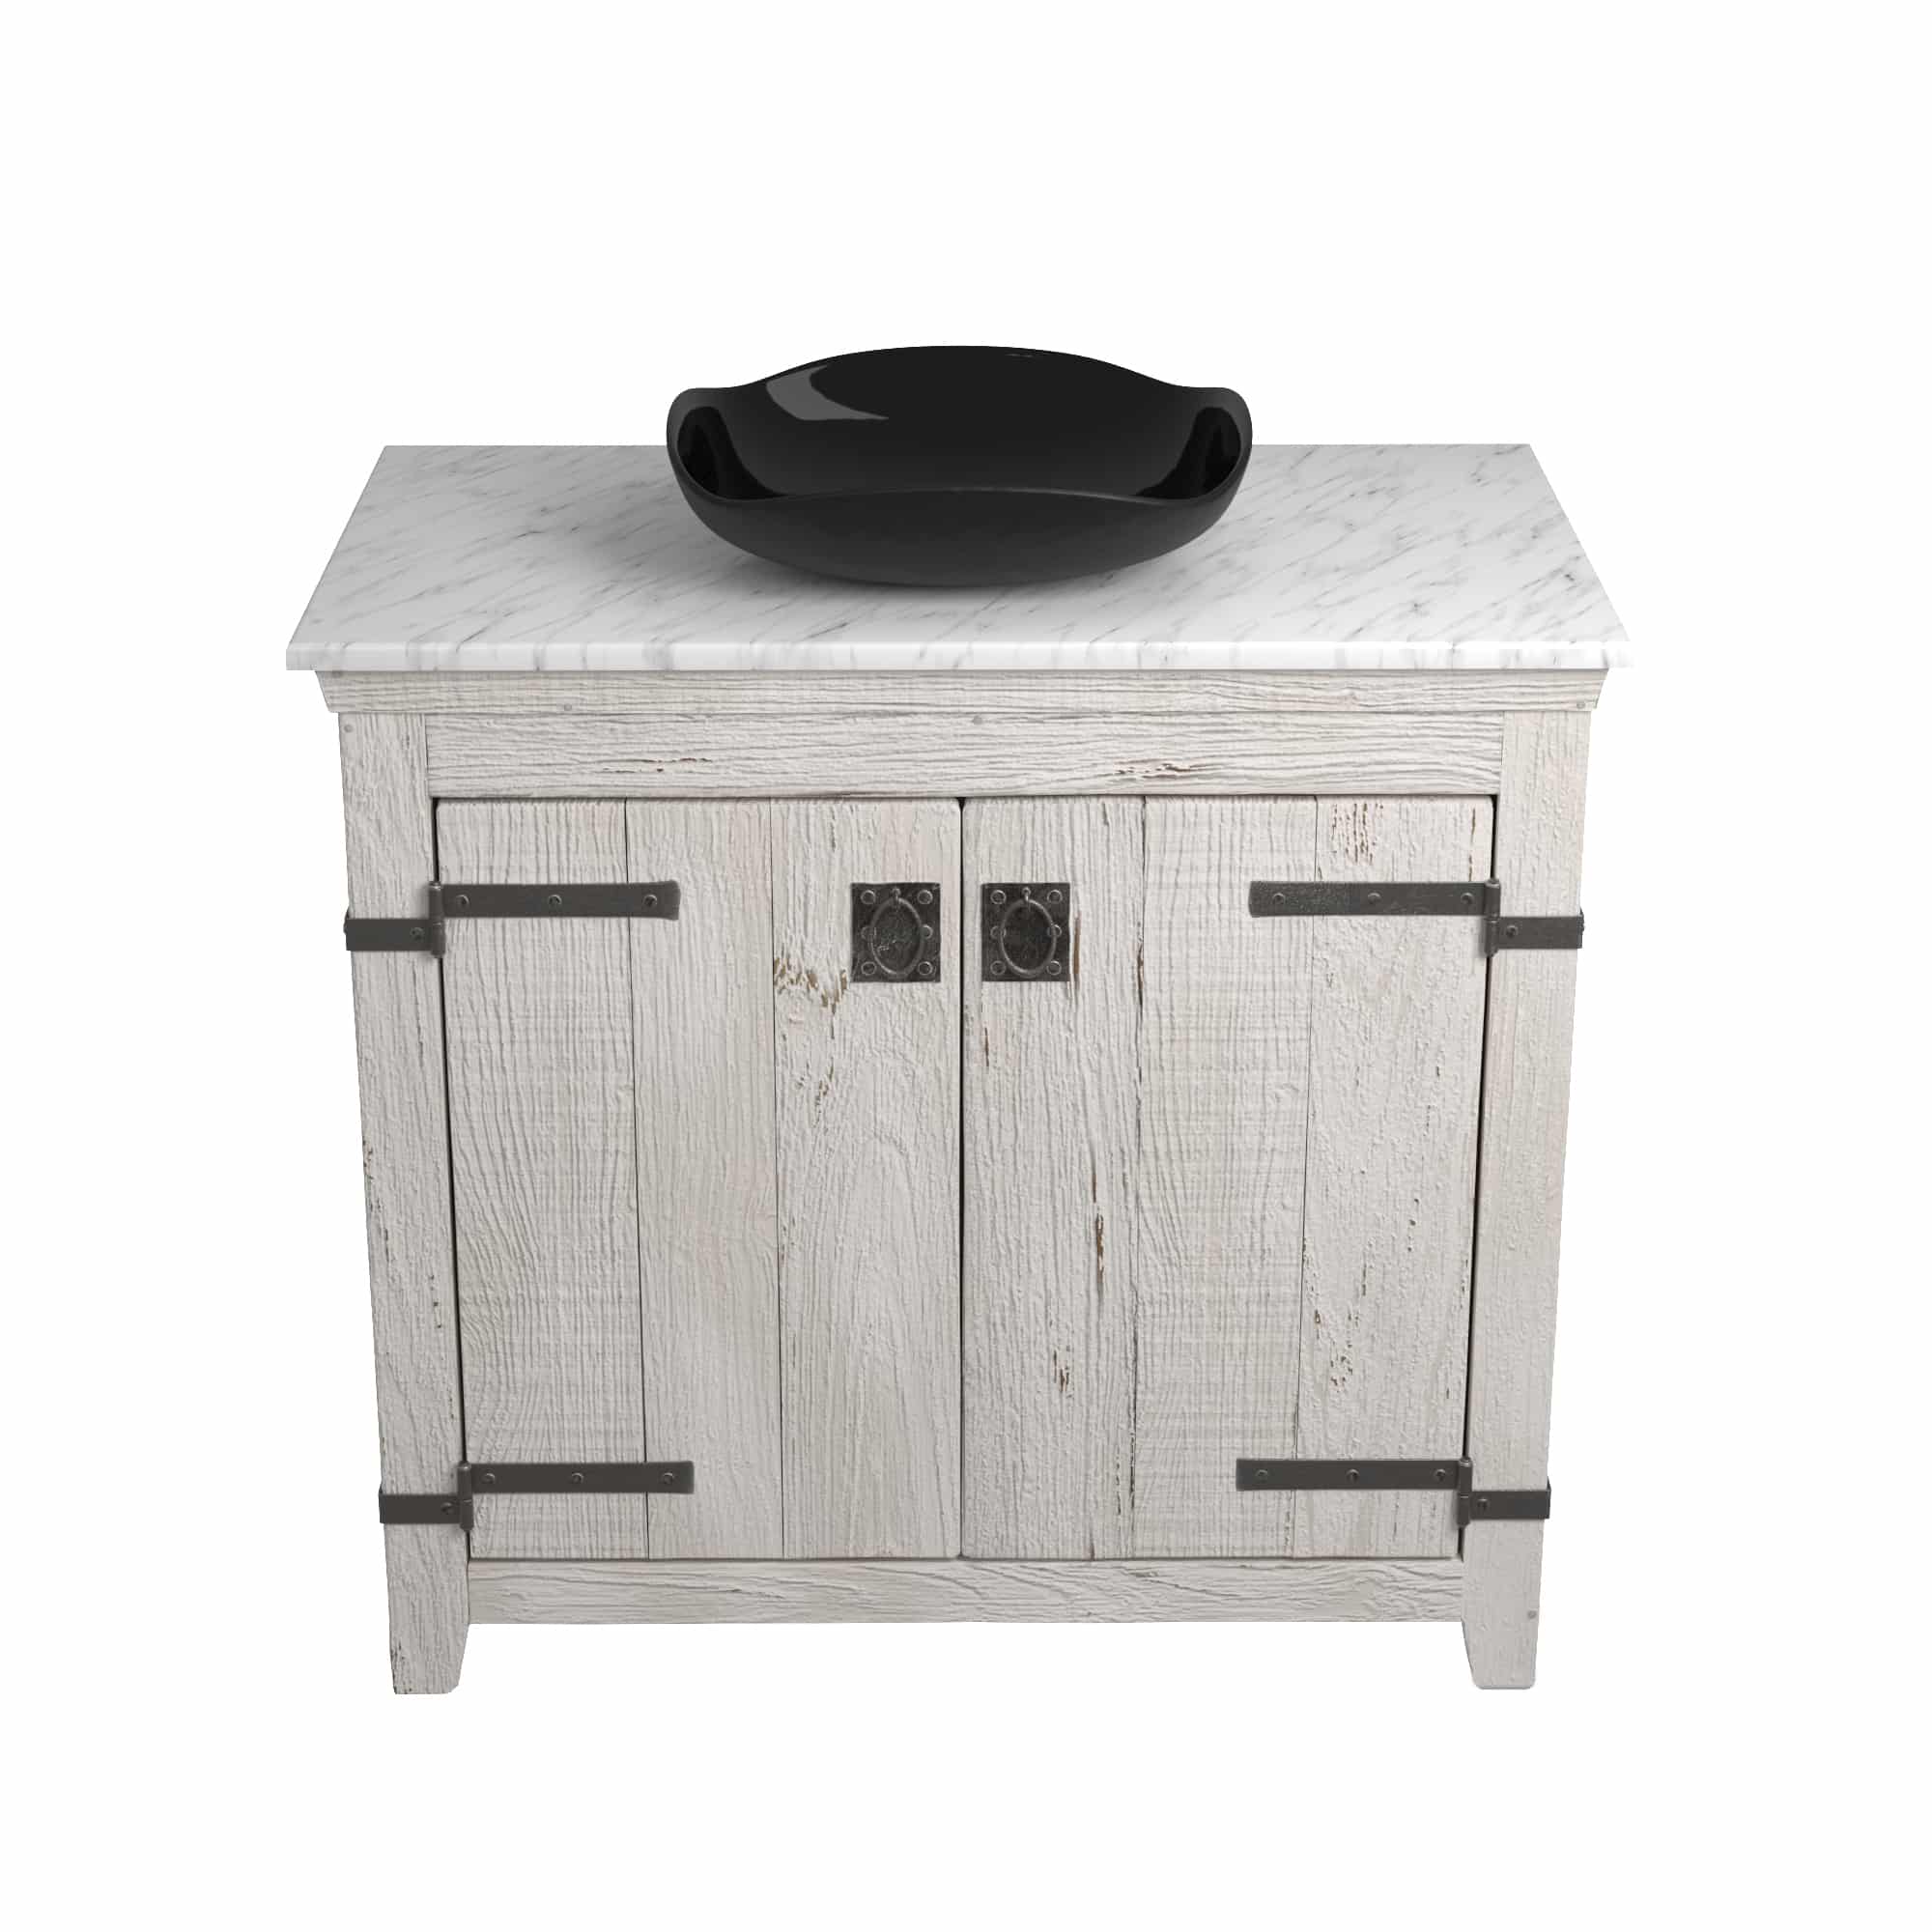 Native Trails 36" Americana Vanity in Whitewash with Carrara Marble Top and Lido in Abyss, No Faucet Hole, BND36-VB-CT-MG-010